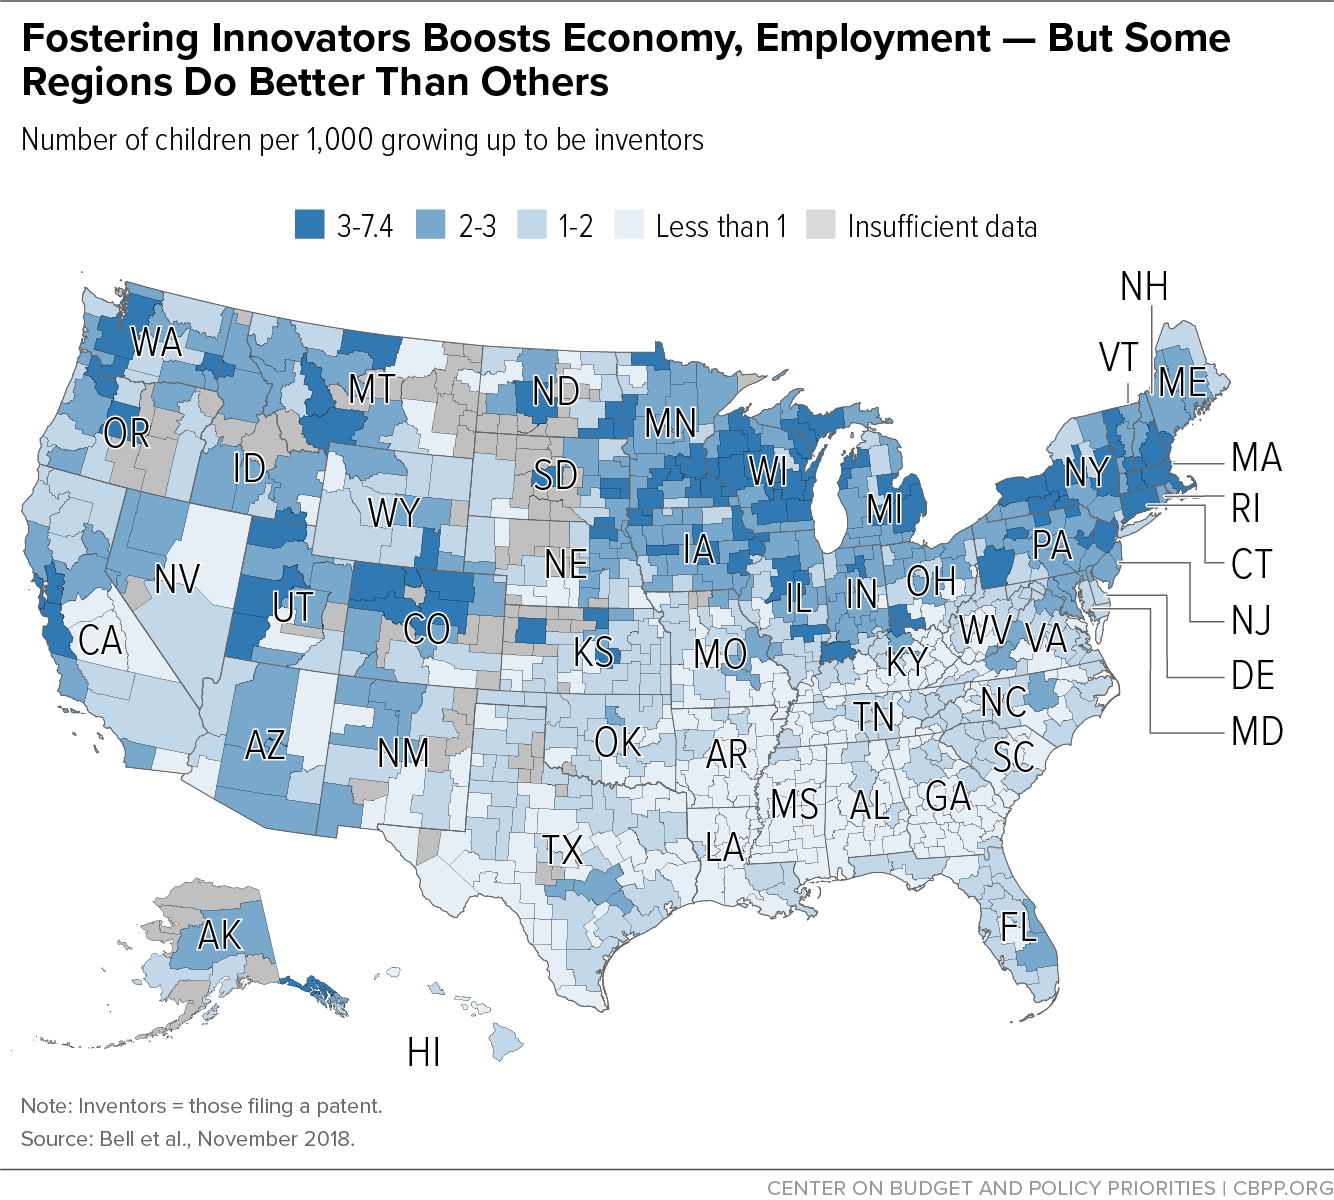 Fostering Innovators Boosts Economy, Employment — But Some Regions Do Better Than Others